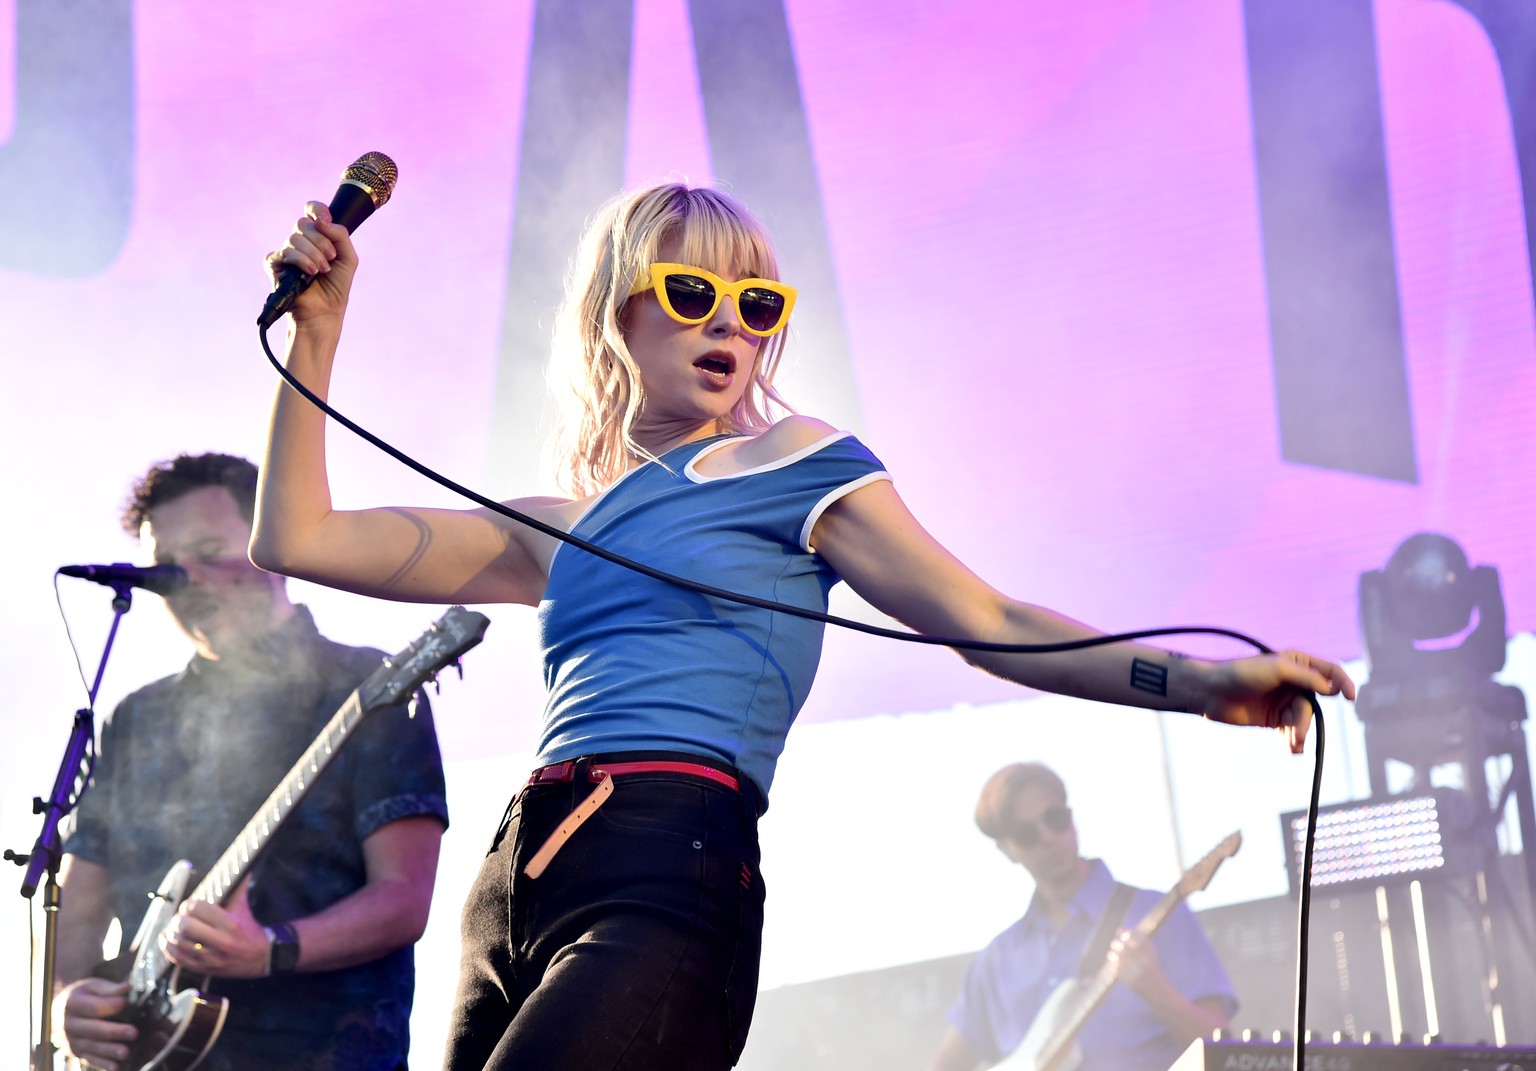 CARSON, CA - MAY 20: Musician Hayley Williams of Paramore performs onstage at KROQ Weenie Roast y Fiesta 2017 at StubHub Center on May 20, 2017 in Carson, California. (Photo by Alberto E. Rodriguez/Ge ...